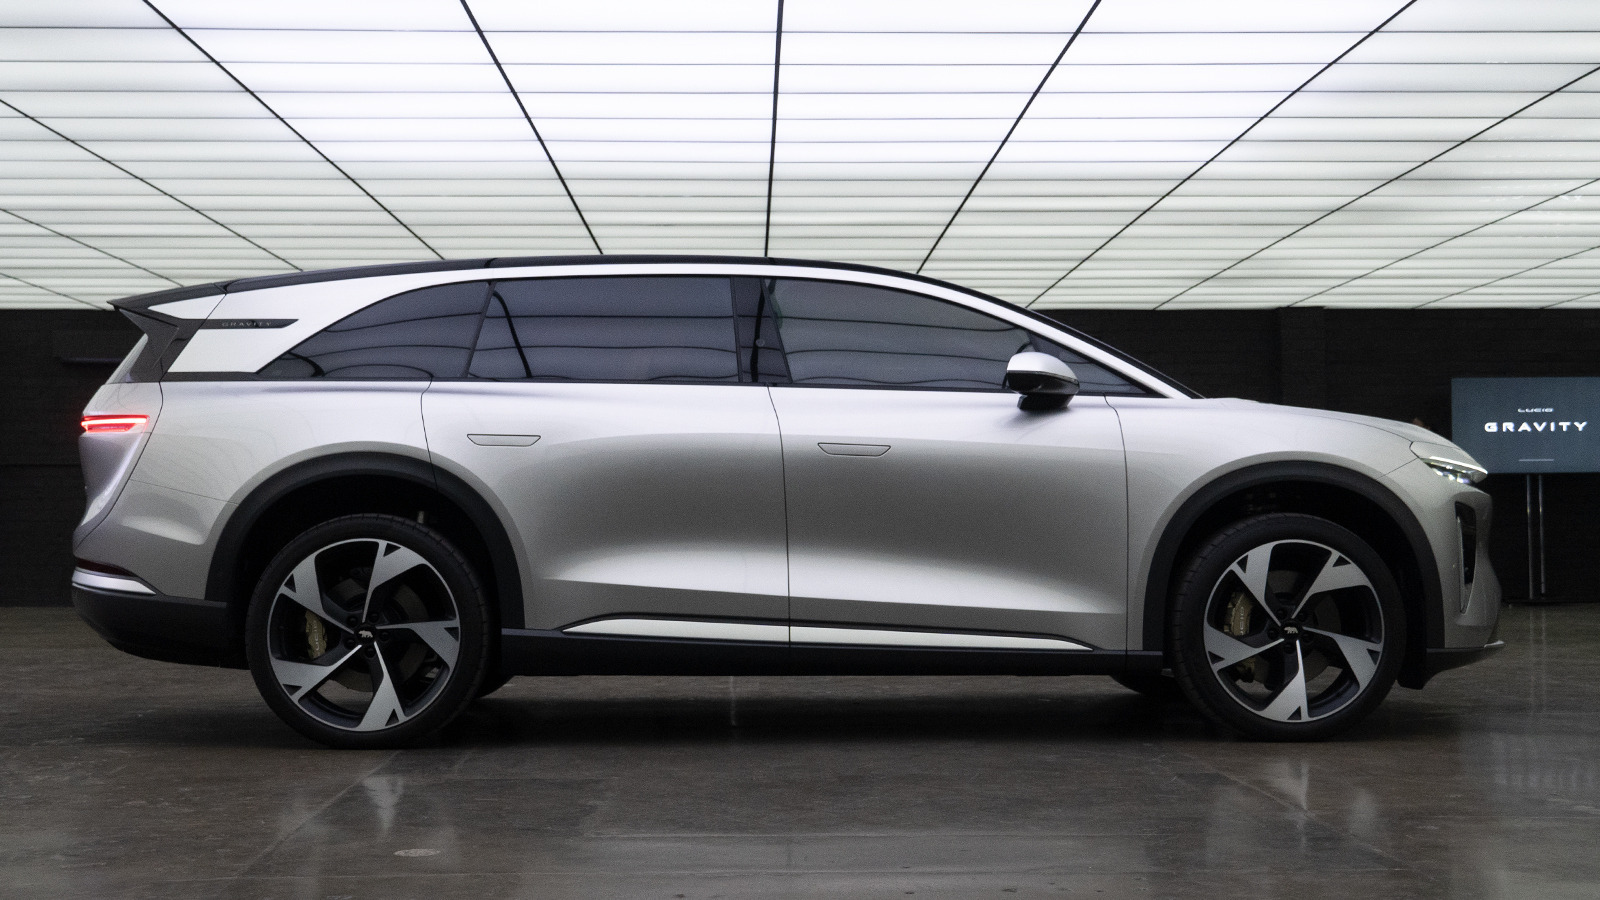 https://www.slashgear.com/img/gallery/lucid-gravity-first-look-this-electric-3-row-suv-is-better-than-we-expected/l-intro-1700146818.jpg